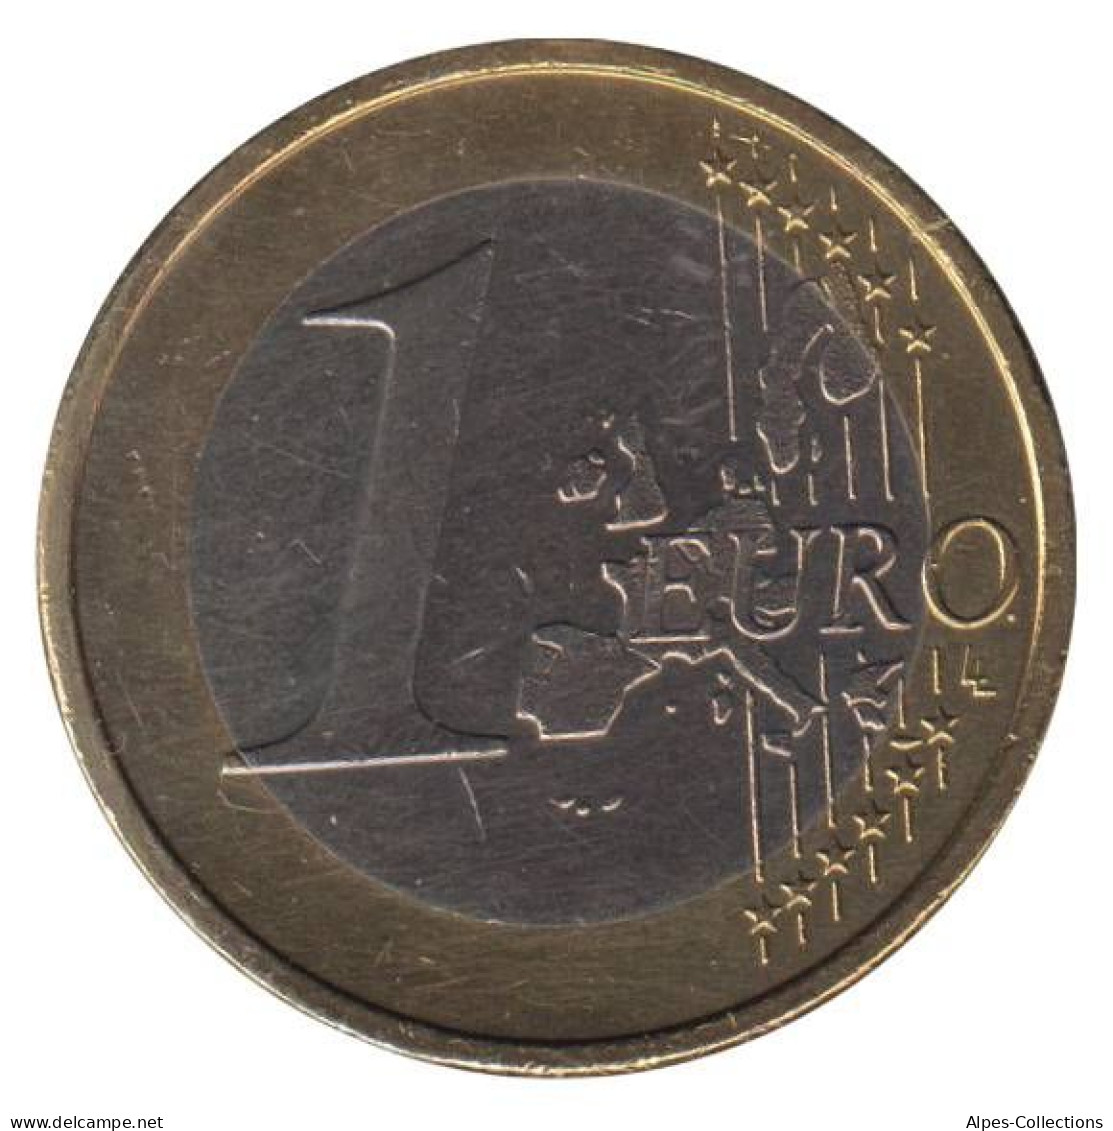 AL10002.1A - ALLEMAGNE - 1 Euro - 2002 A - Germany